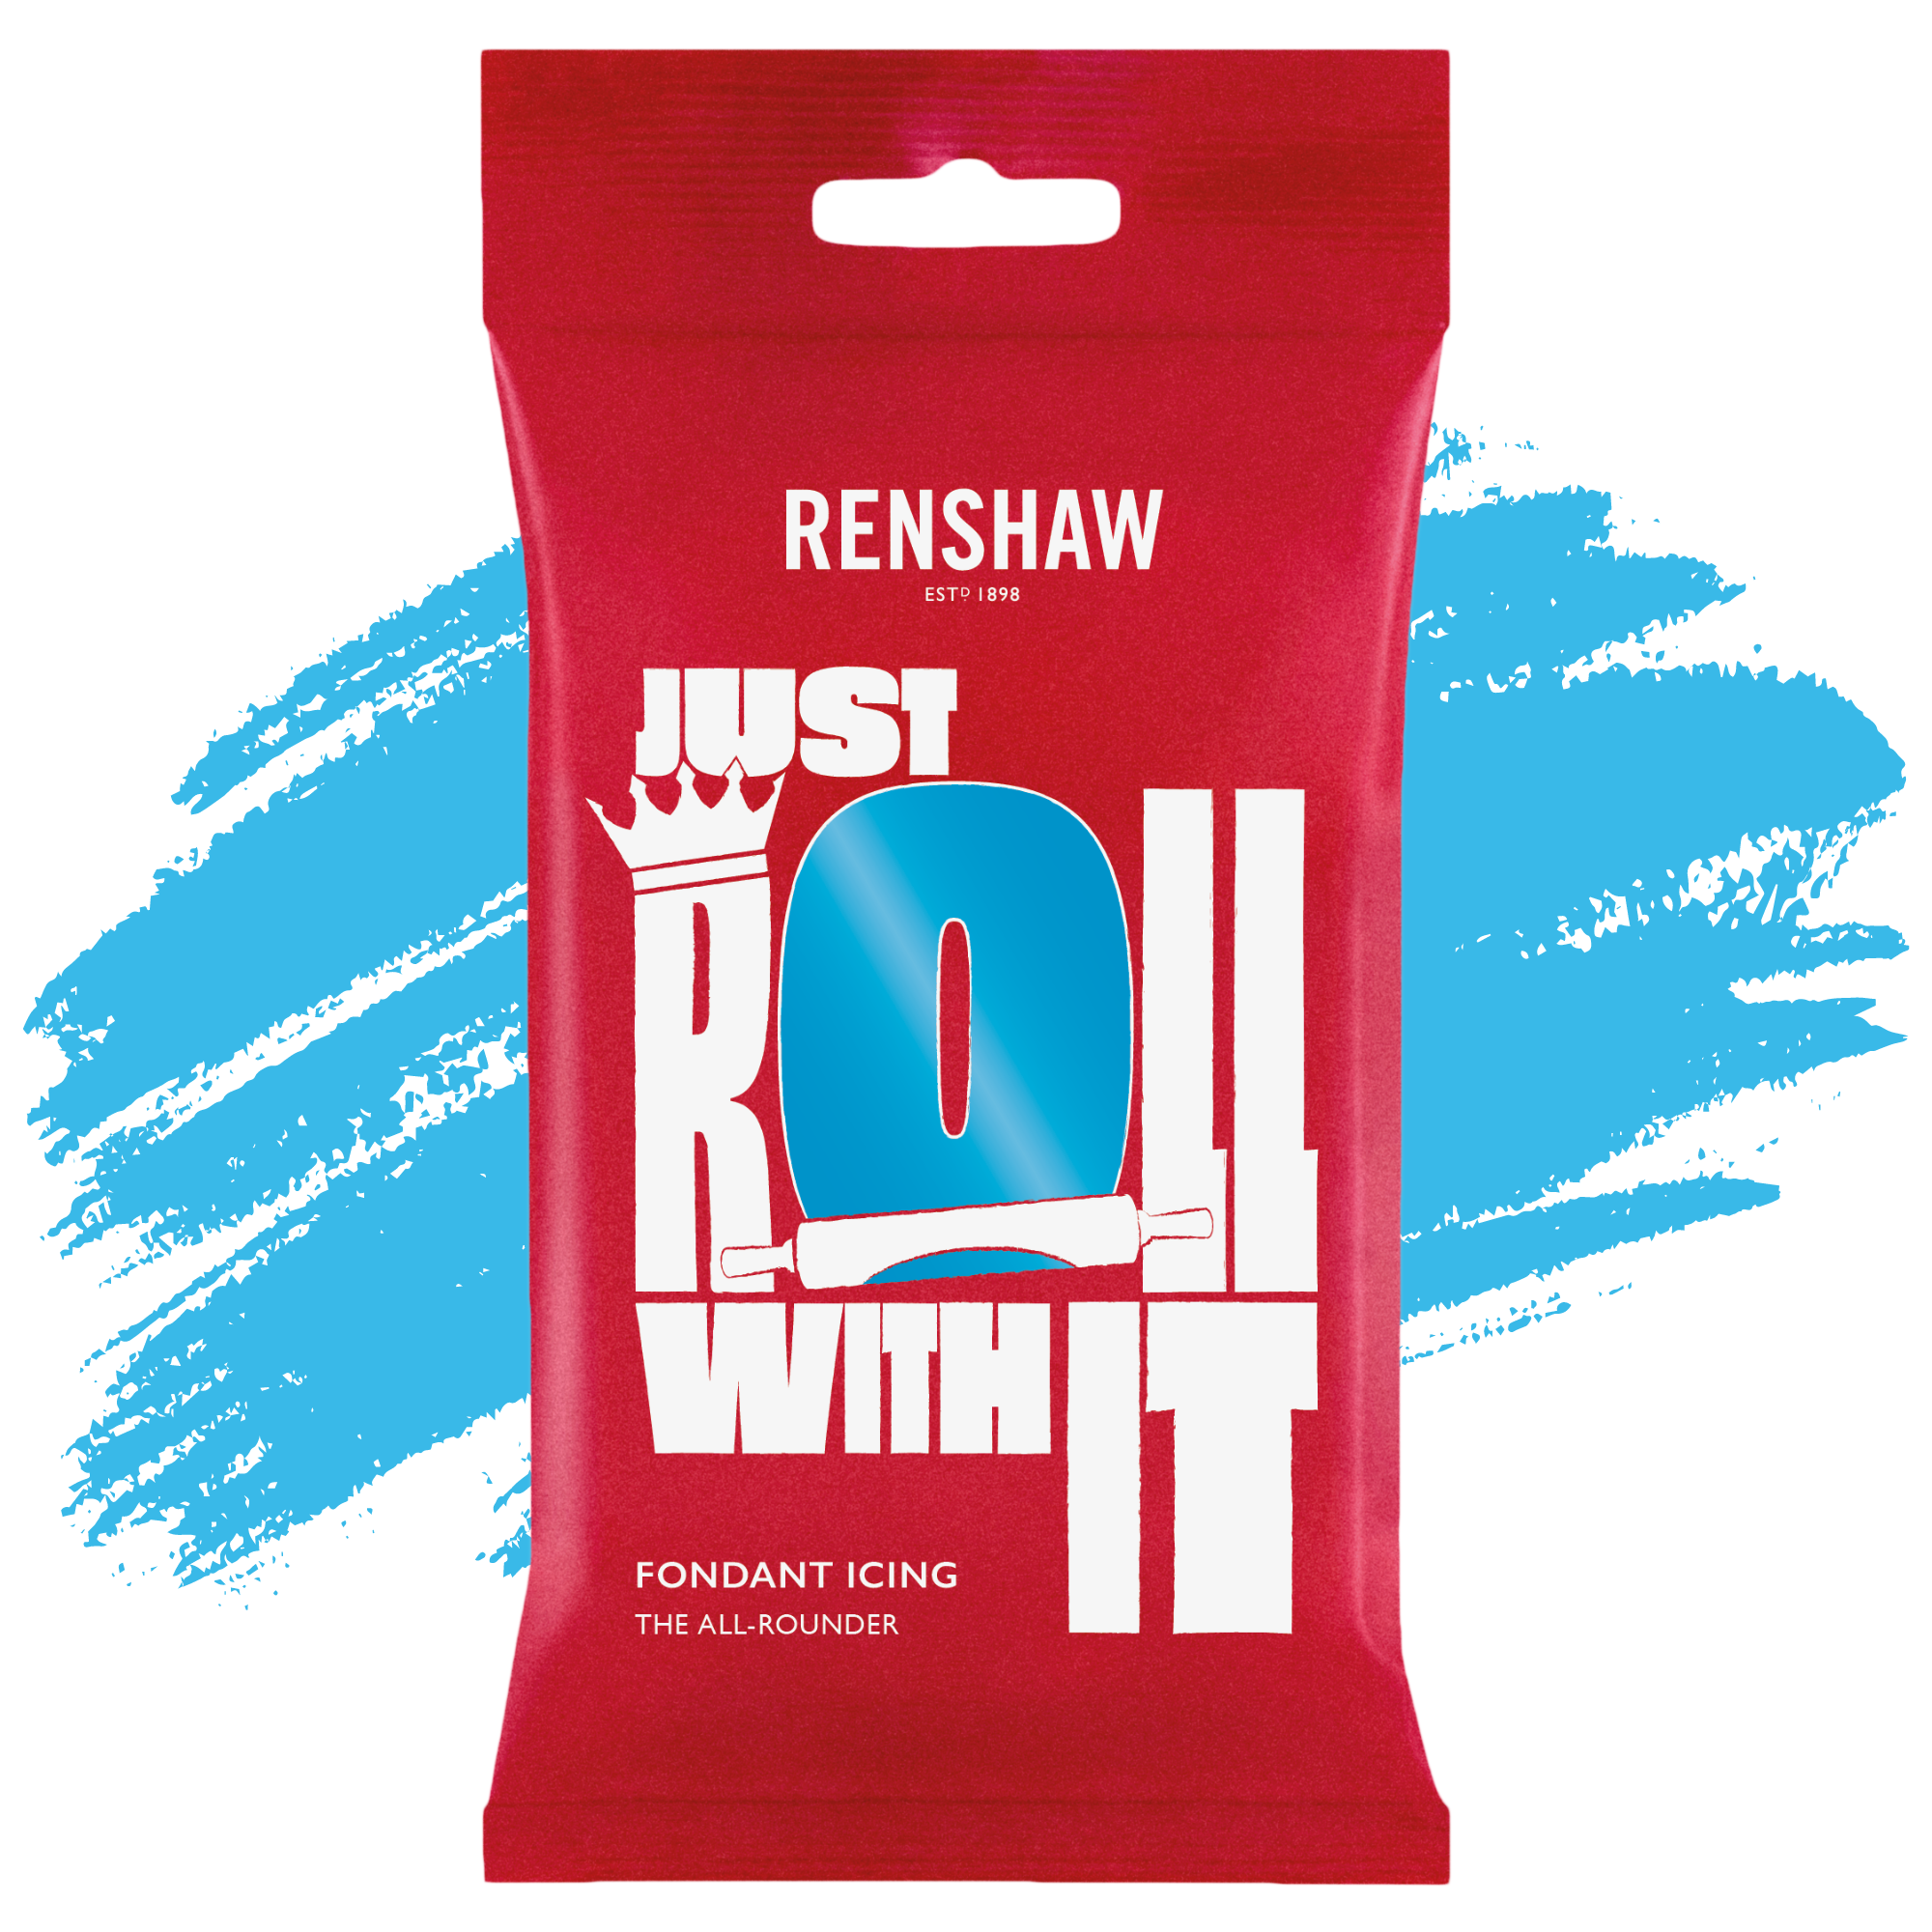 Renshaw Professional Sugar Paste Ready to Roll Fondant Just Roll with it Icing - Turquoise Blue - 250g